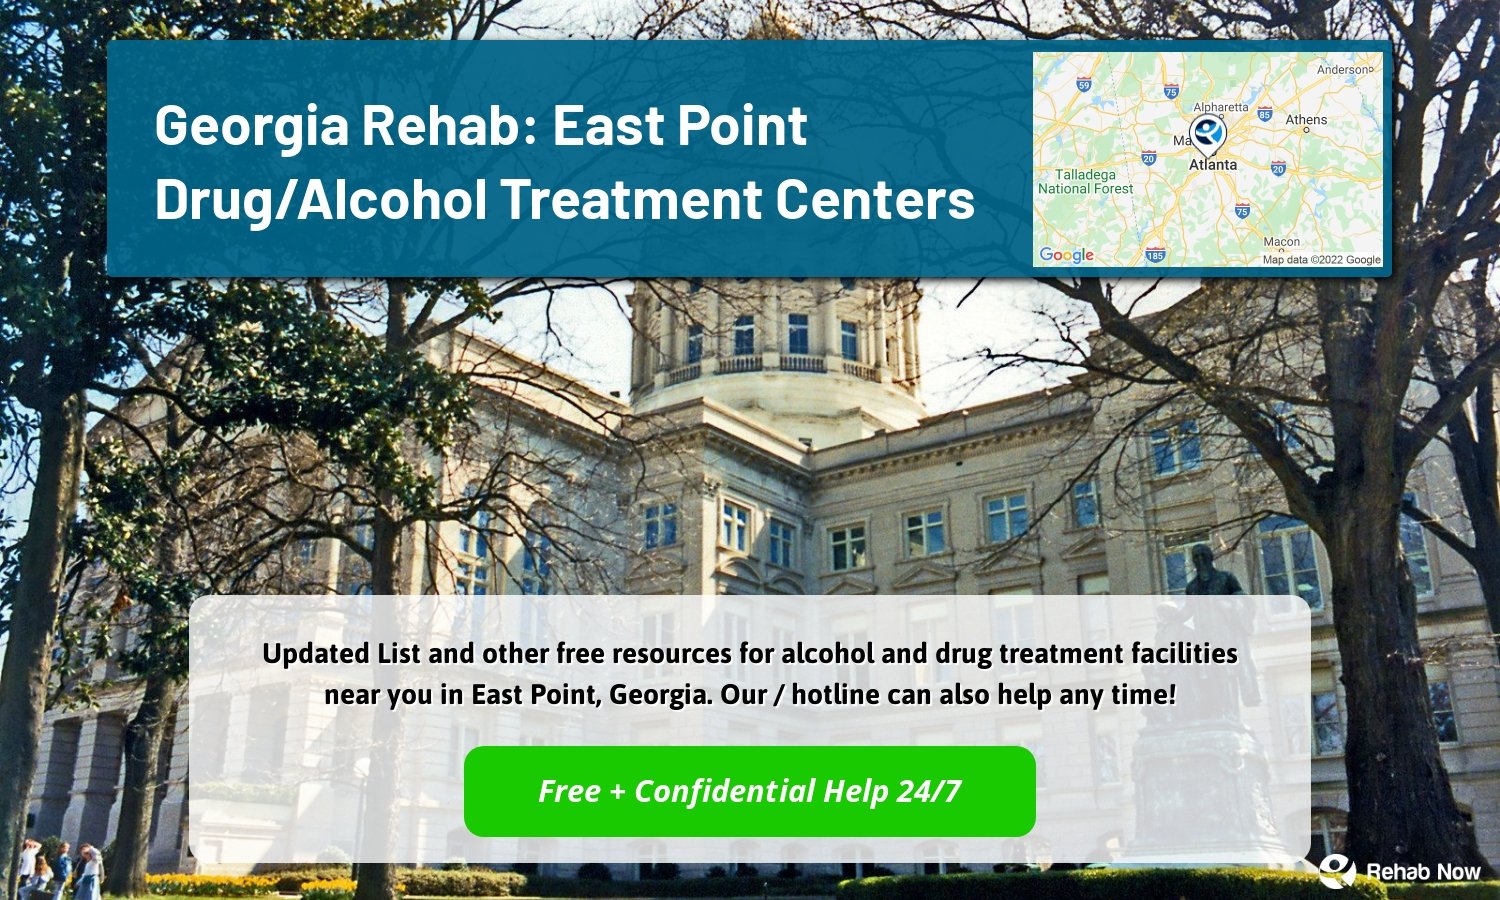  Updated List and other free resources for alcohol and drug treatment facilities near you in East Point, Georgia. Our / hotline can also help any time!